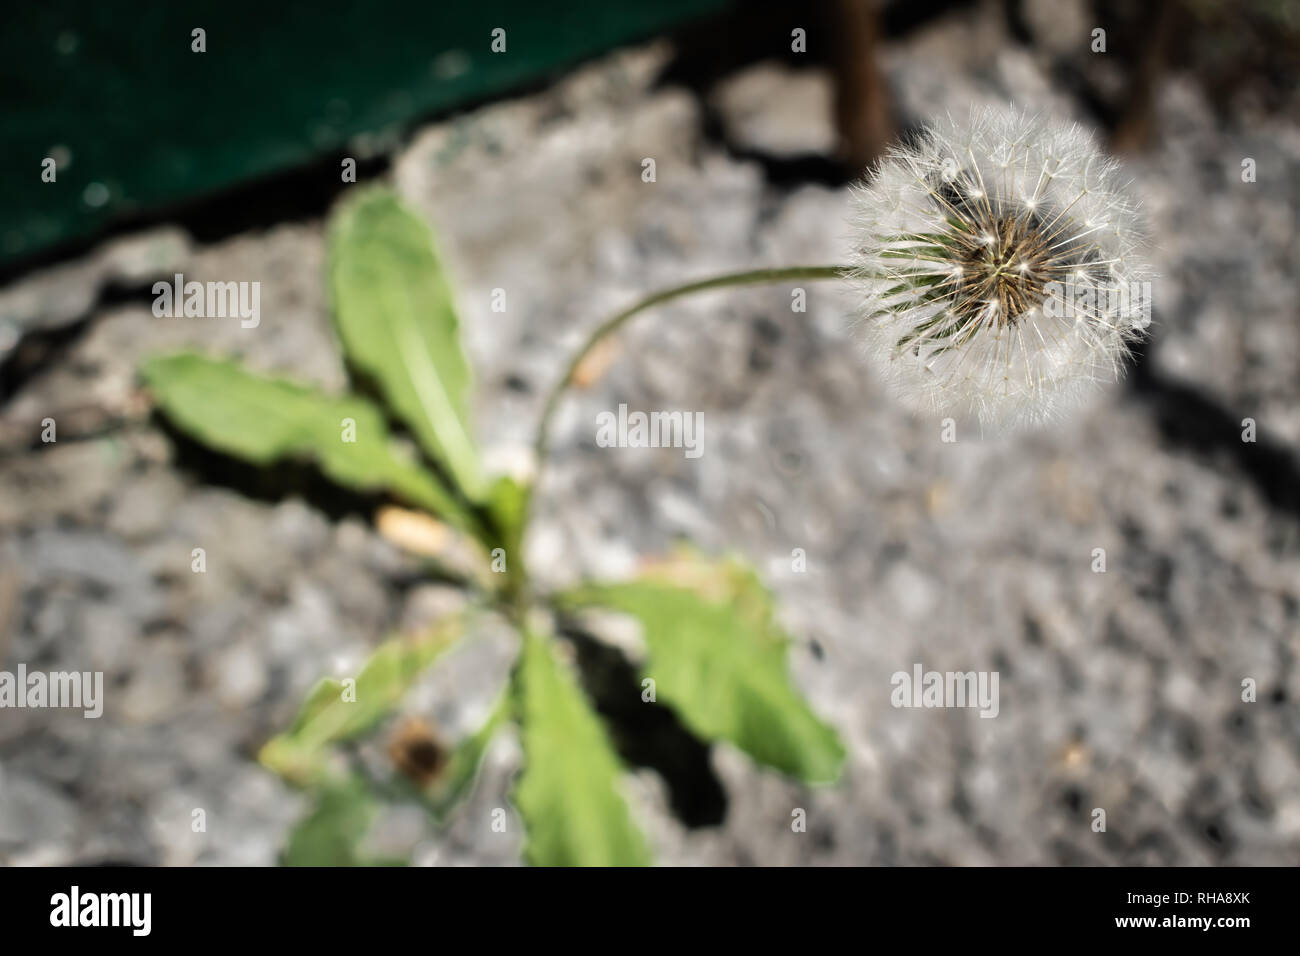 Strength of nature concept:  dandelion plant growing on stones. Stock Photo